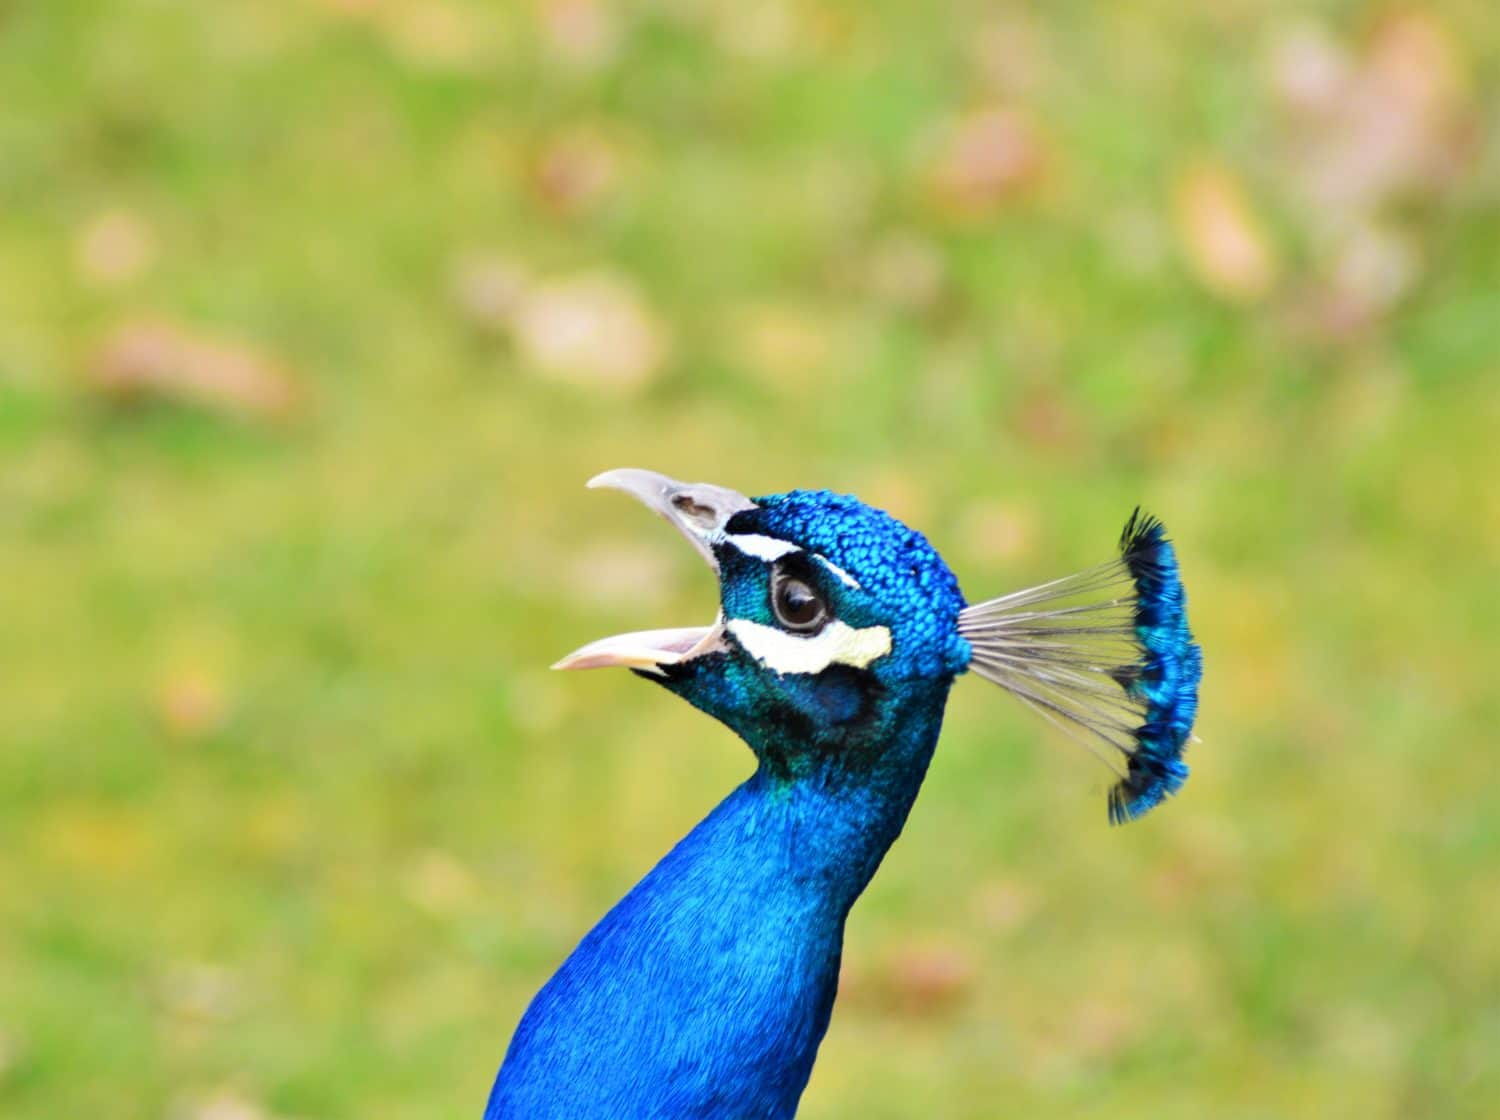 Close up image of a blue male peacock or peafowl showing just it's head and neck with a blurred background.